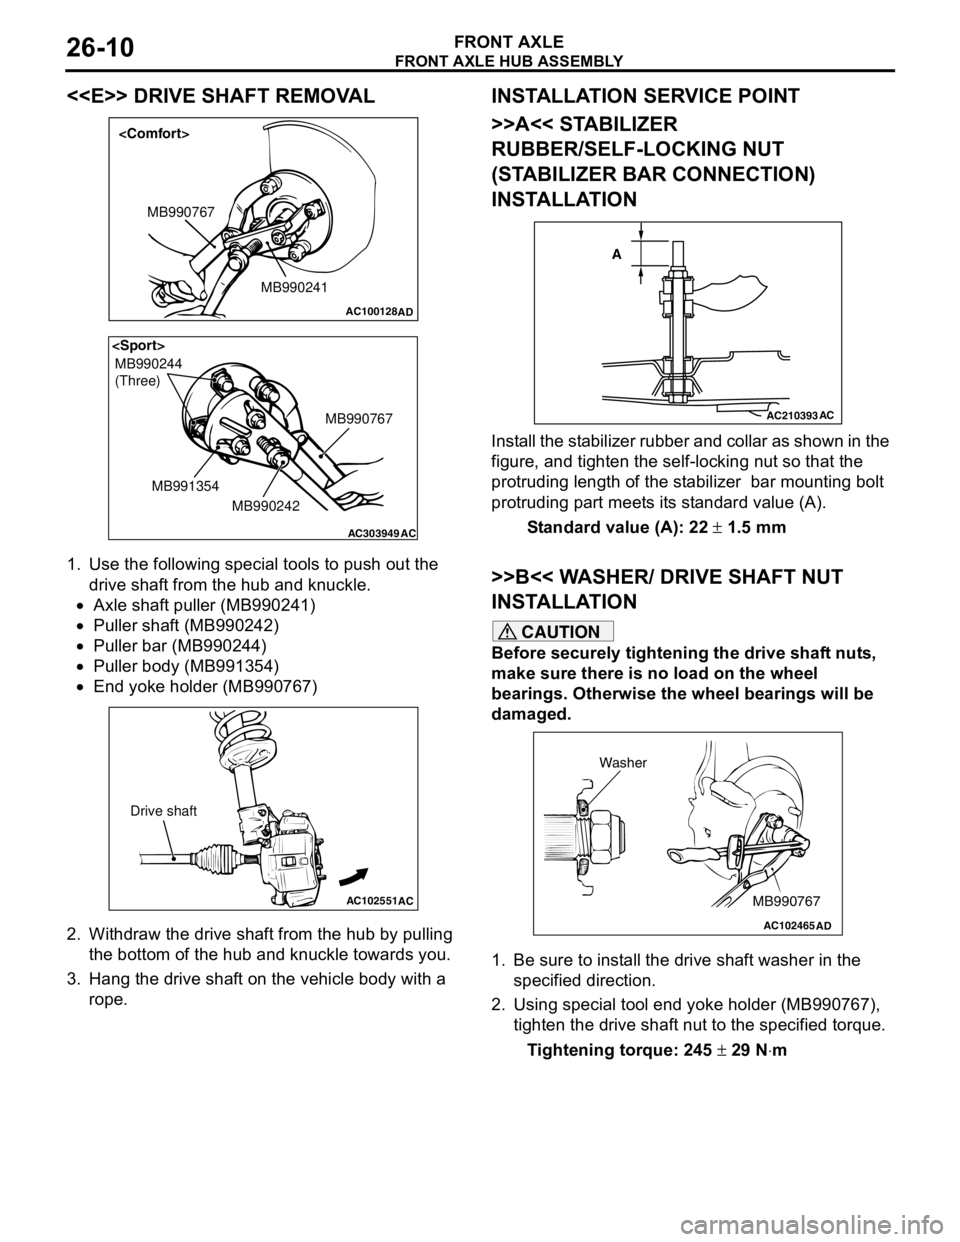 MITSUBISHI LANCER 2005  Workshop Manual FRONT AXLE HUB ASSEMBLY
FRONT AXLE26-10
<<E>> DRIVE SHAFT REMOVAL
1. Use the following special tools to push out the 
drive shaft from the hub and knuckle.
•Axle shaft puller (MB990241)
•Puller sh